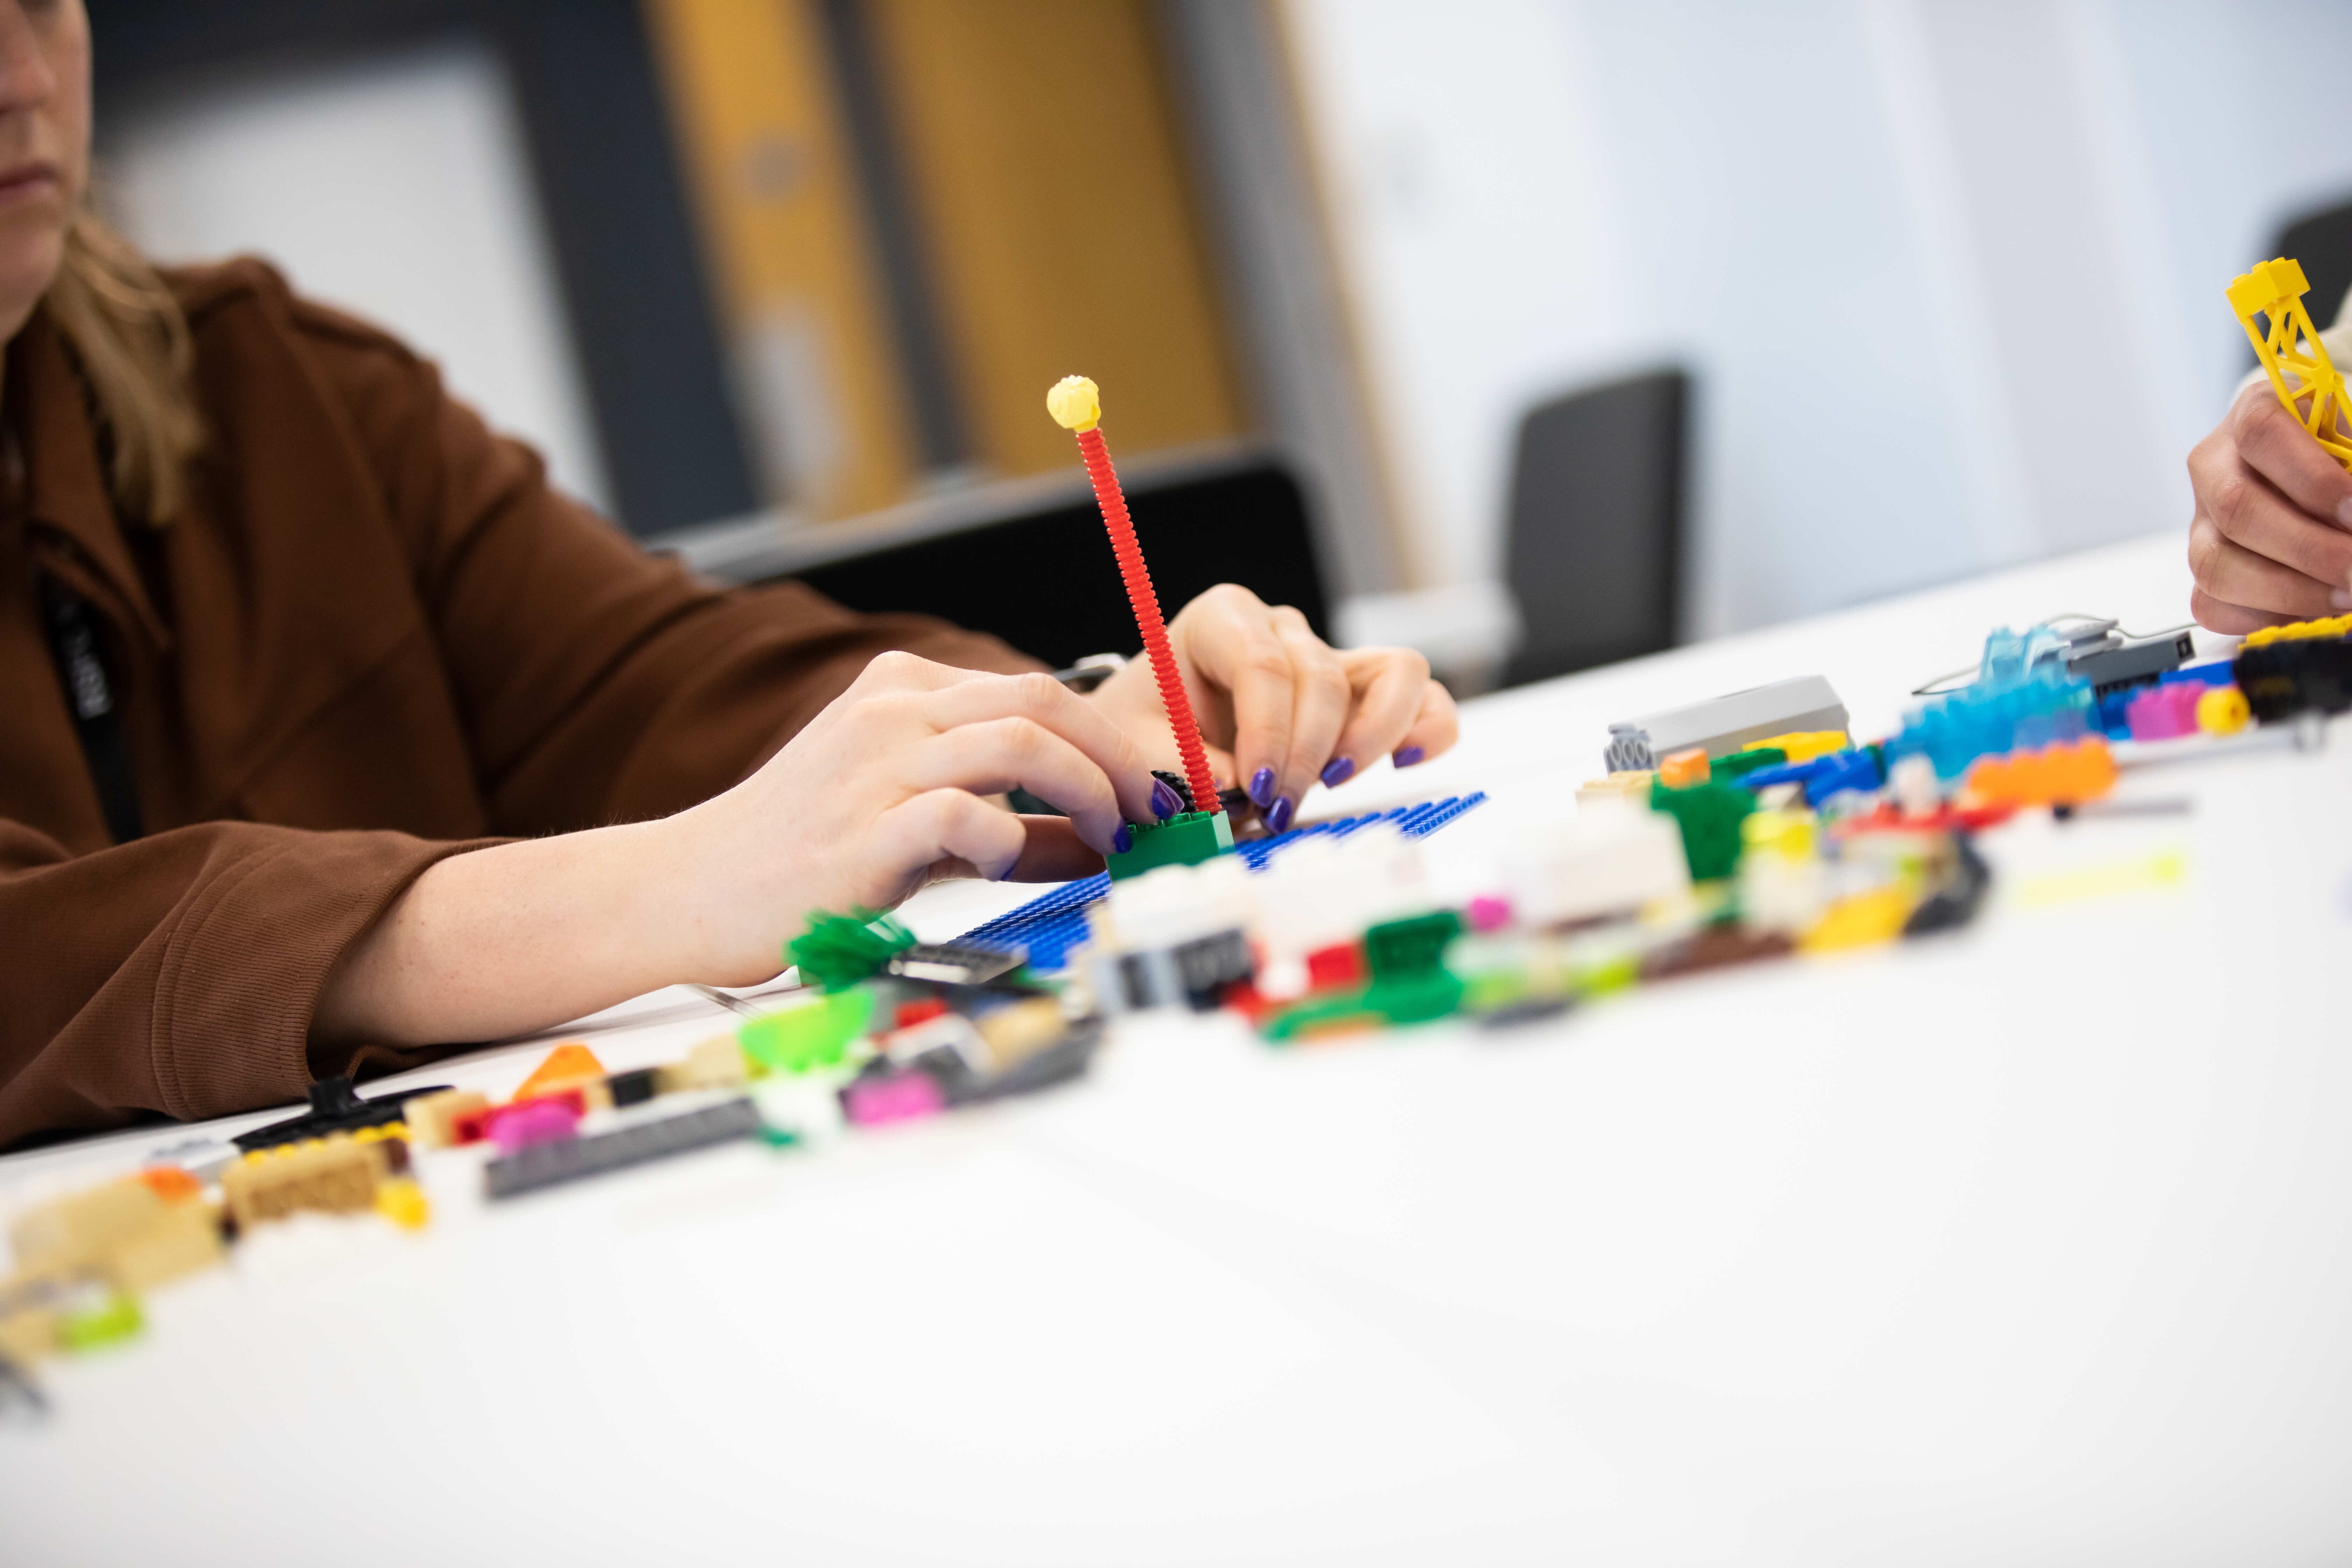 Student playing with lego